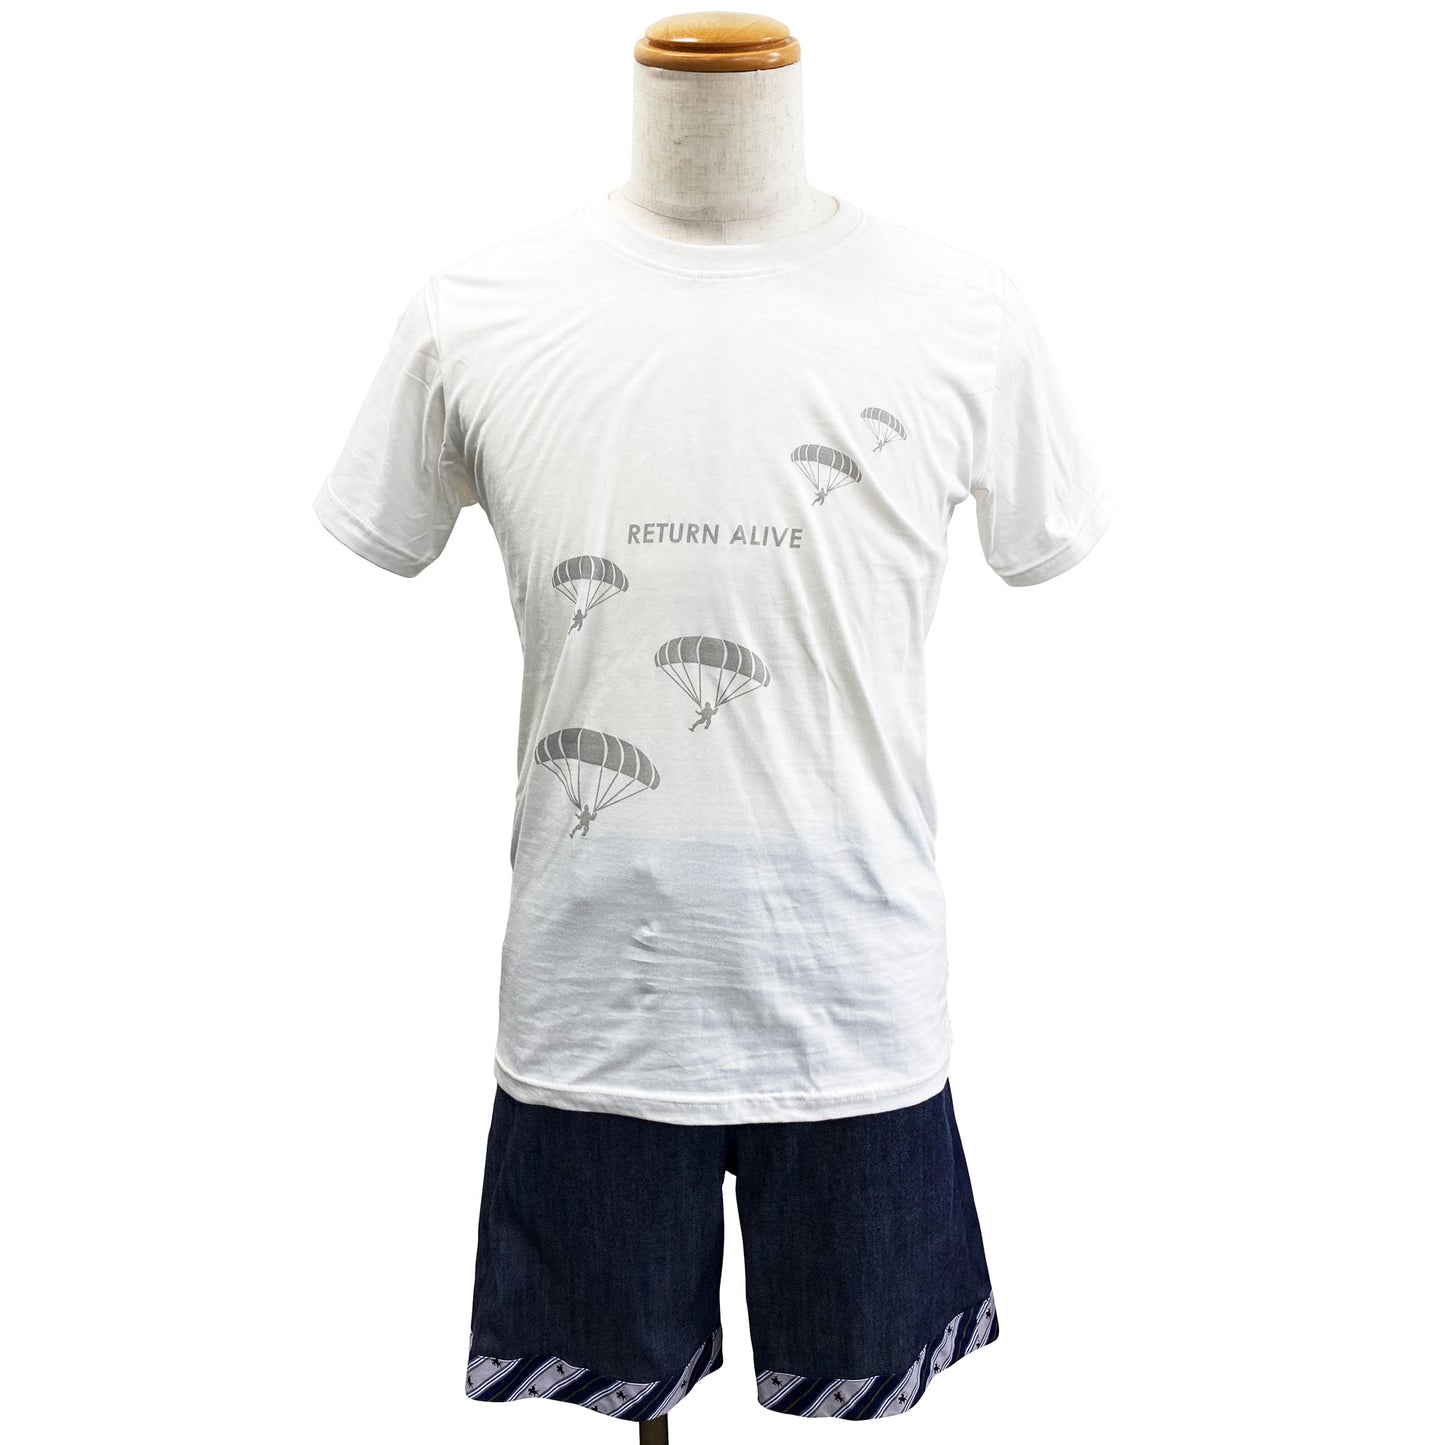 Disinfecting Cloth T Shirt Unisex 100% Cotton -Return Alive- White Made in Japan FORTUNA Tokyo